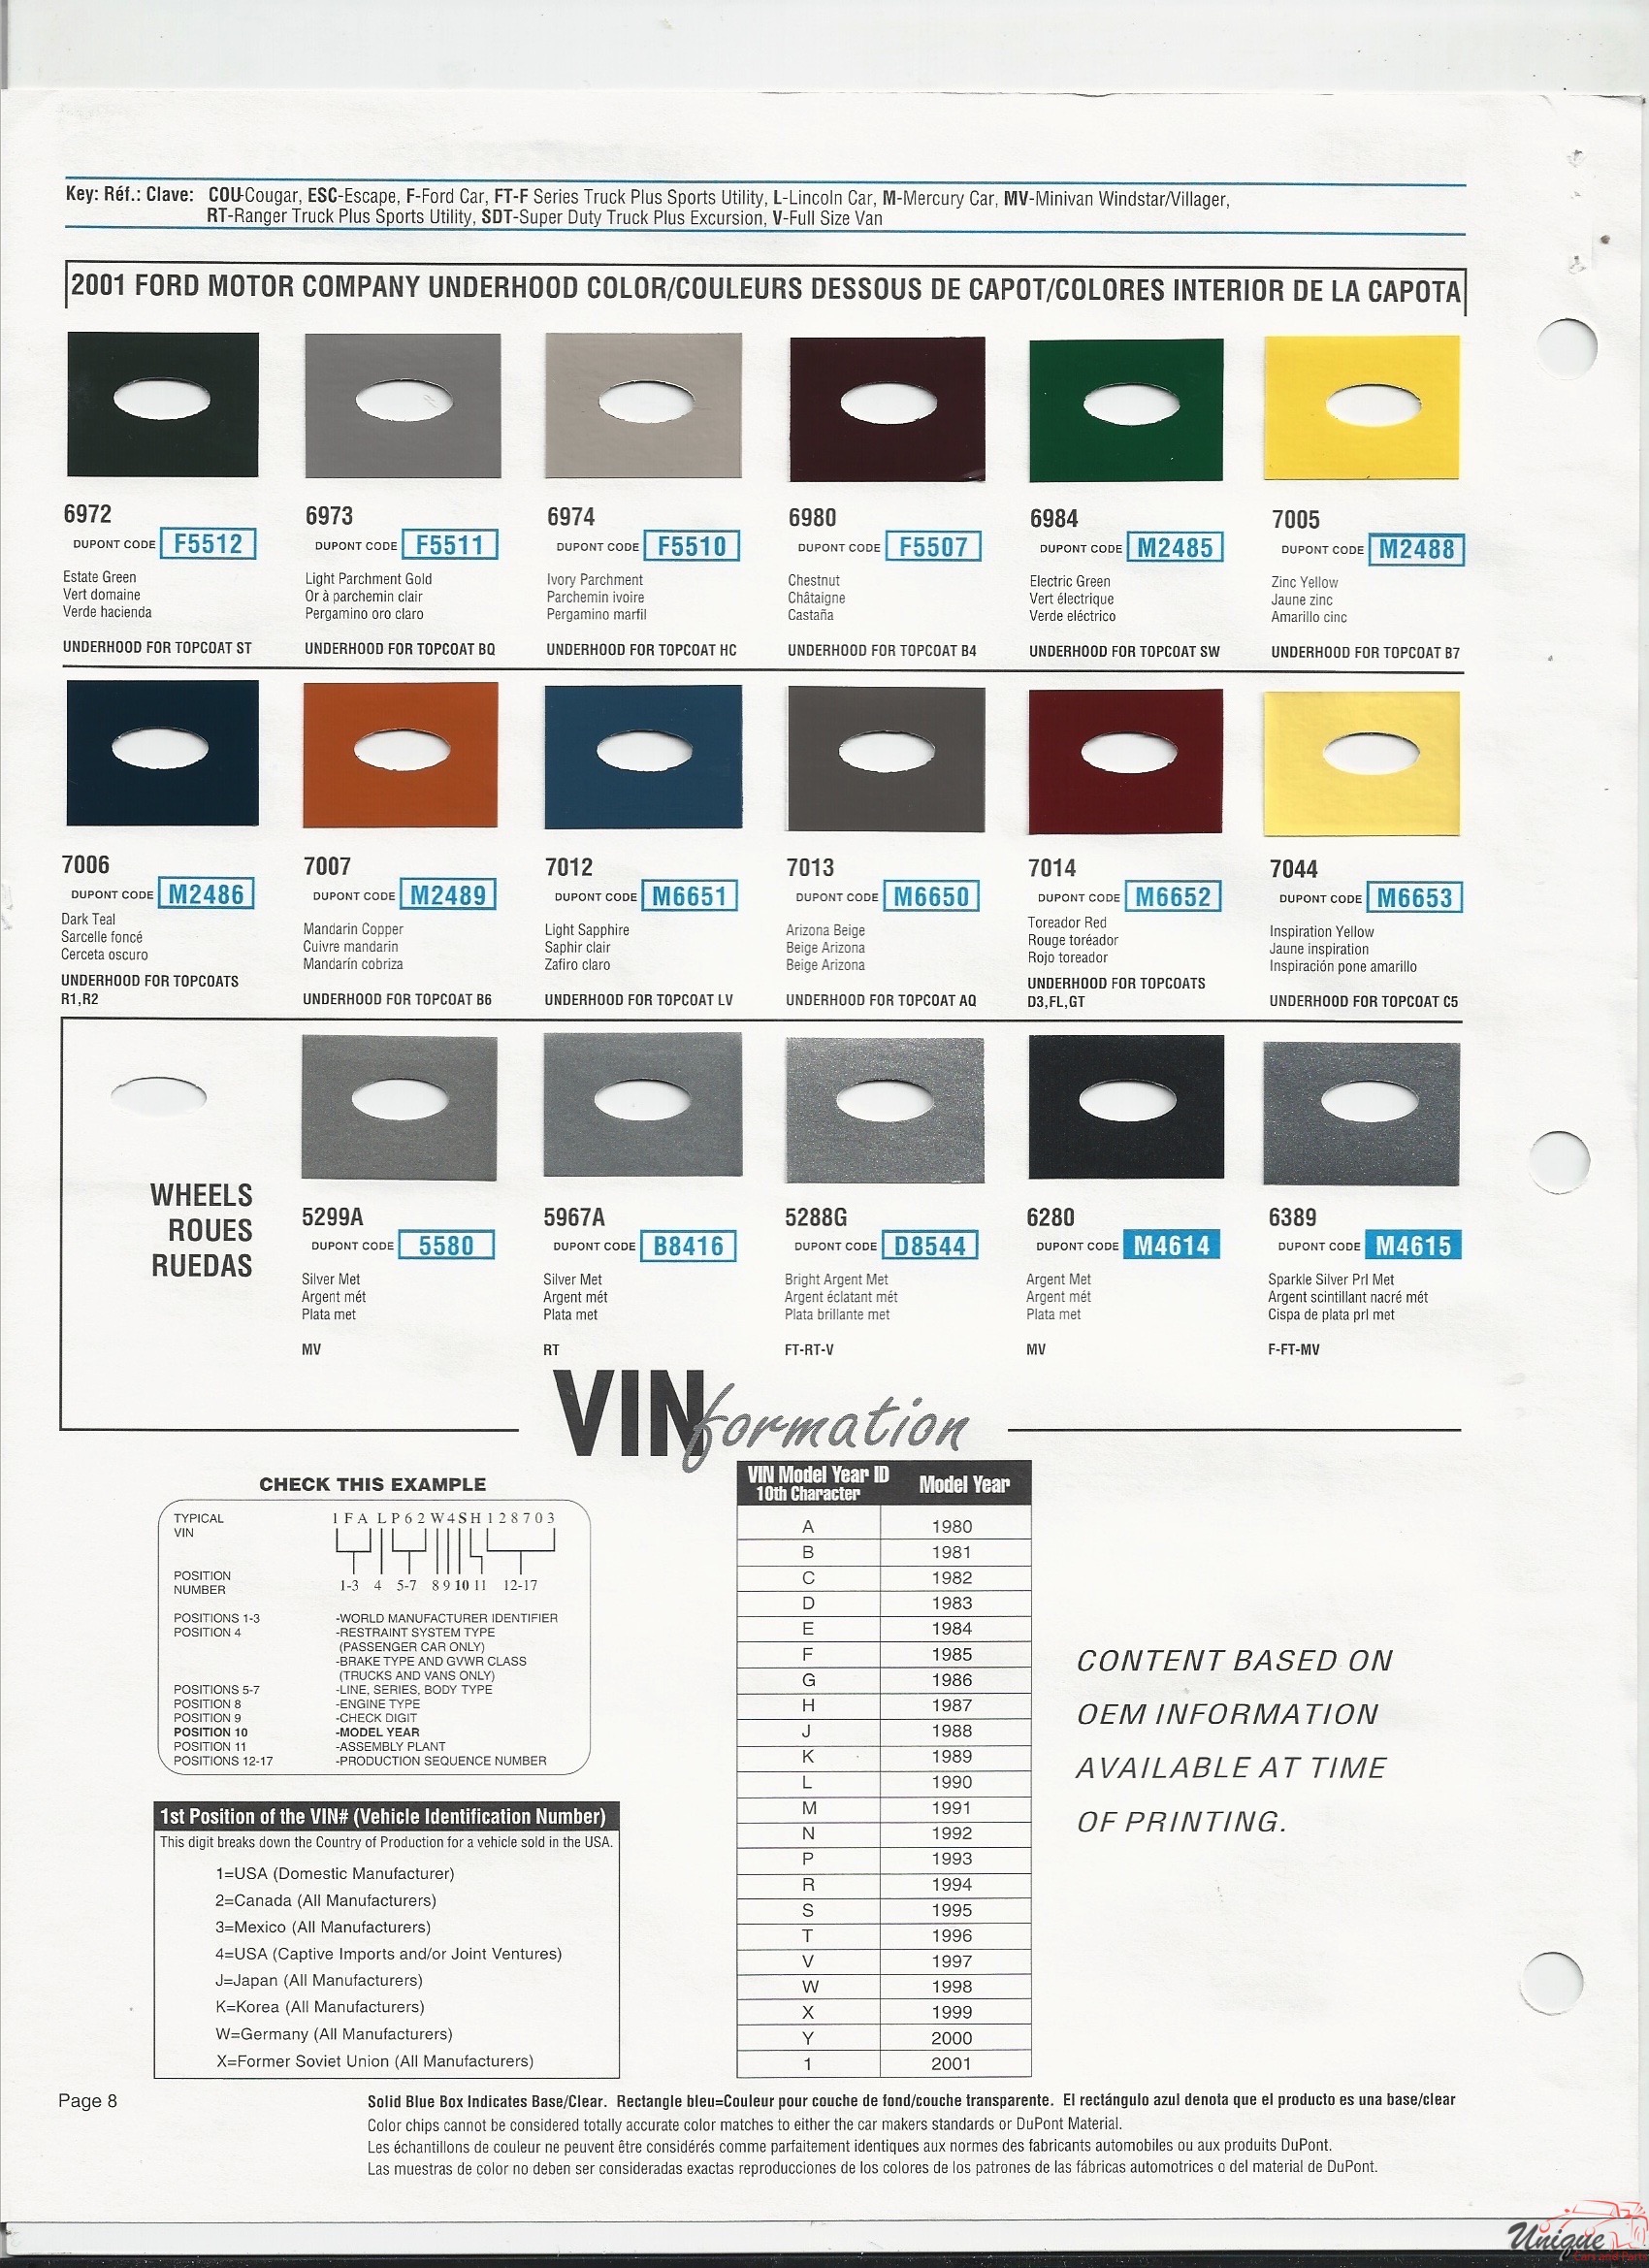 2001 Ford-7 Paint Charts